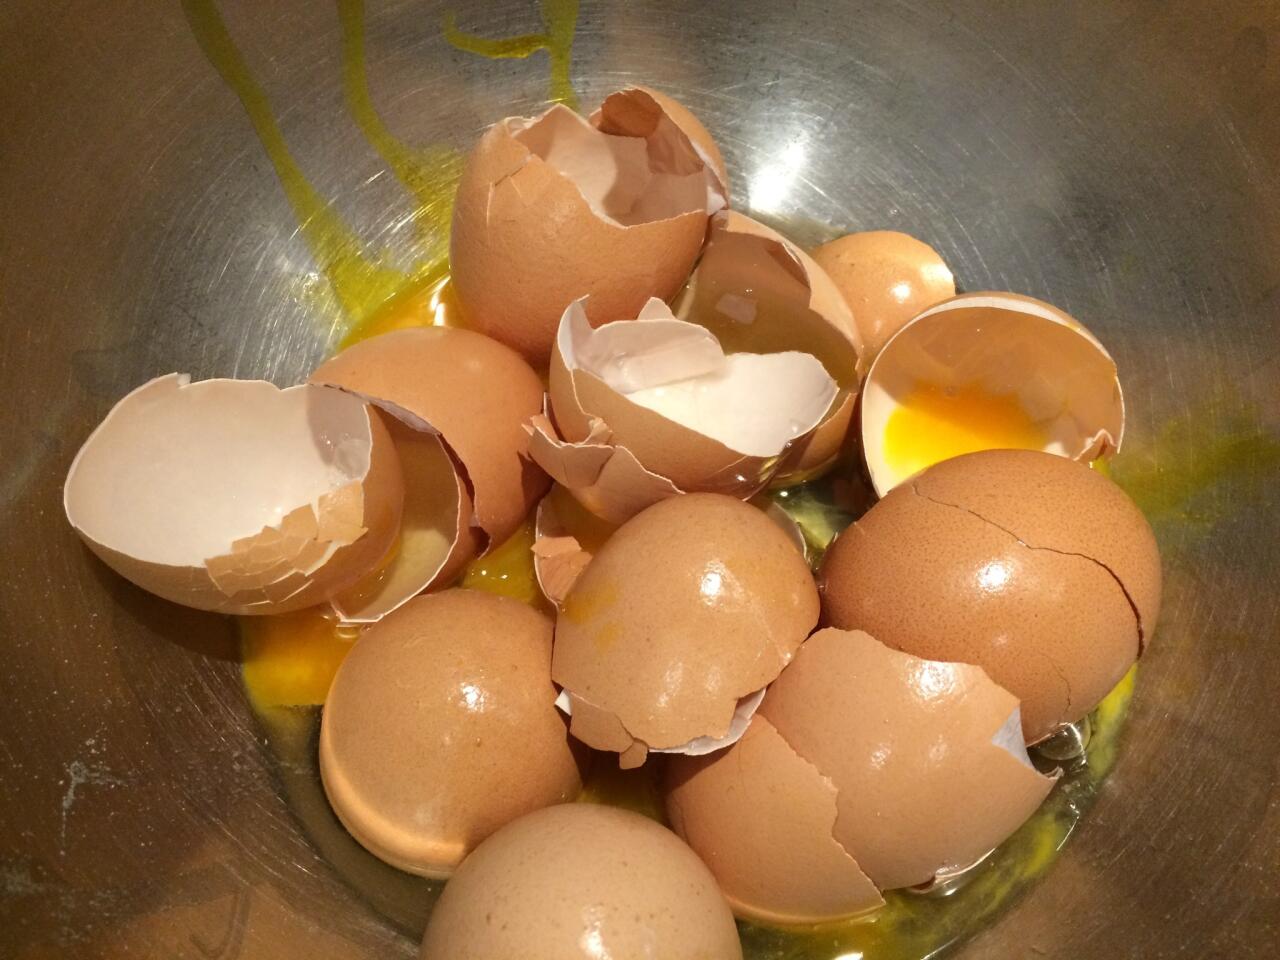 All these eggs went into one small batch of pasta.